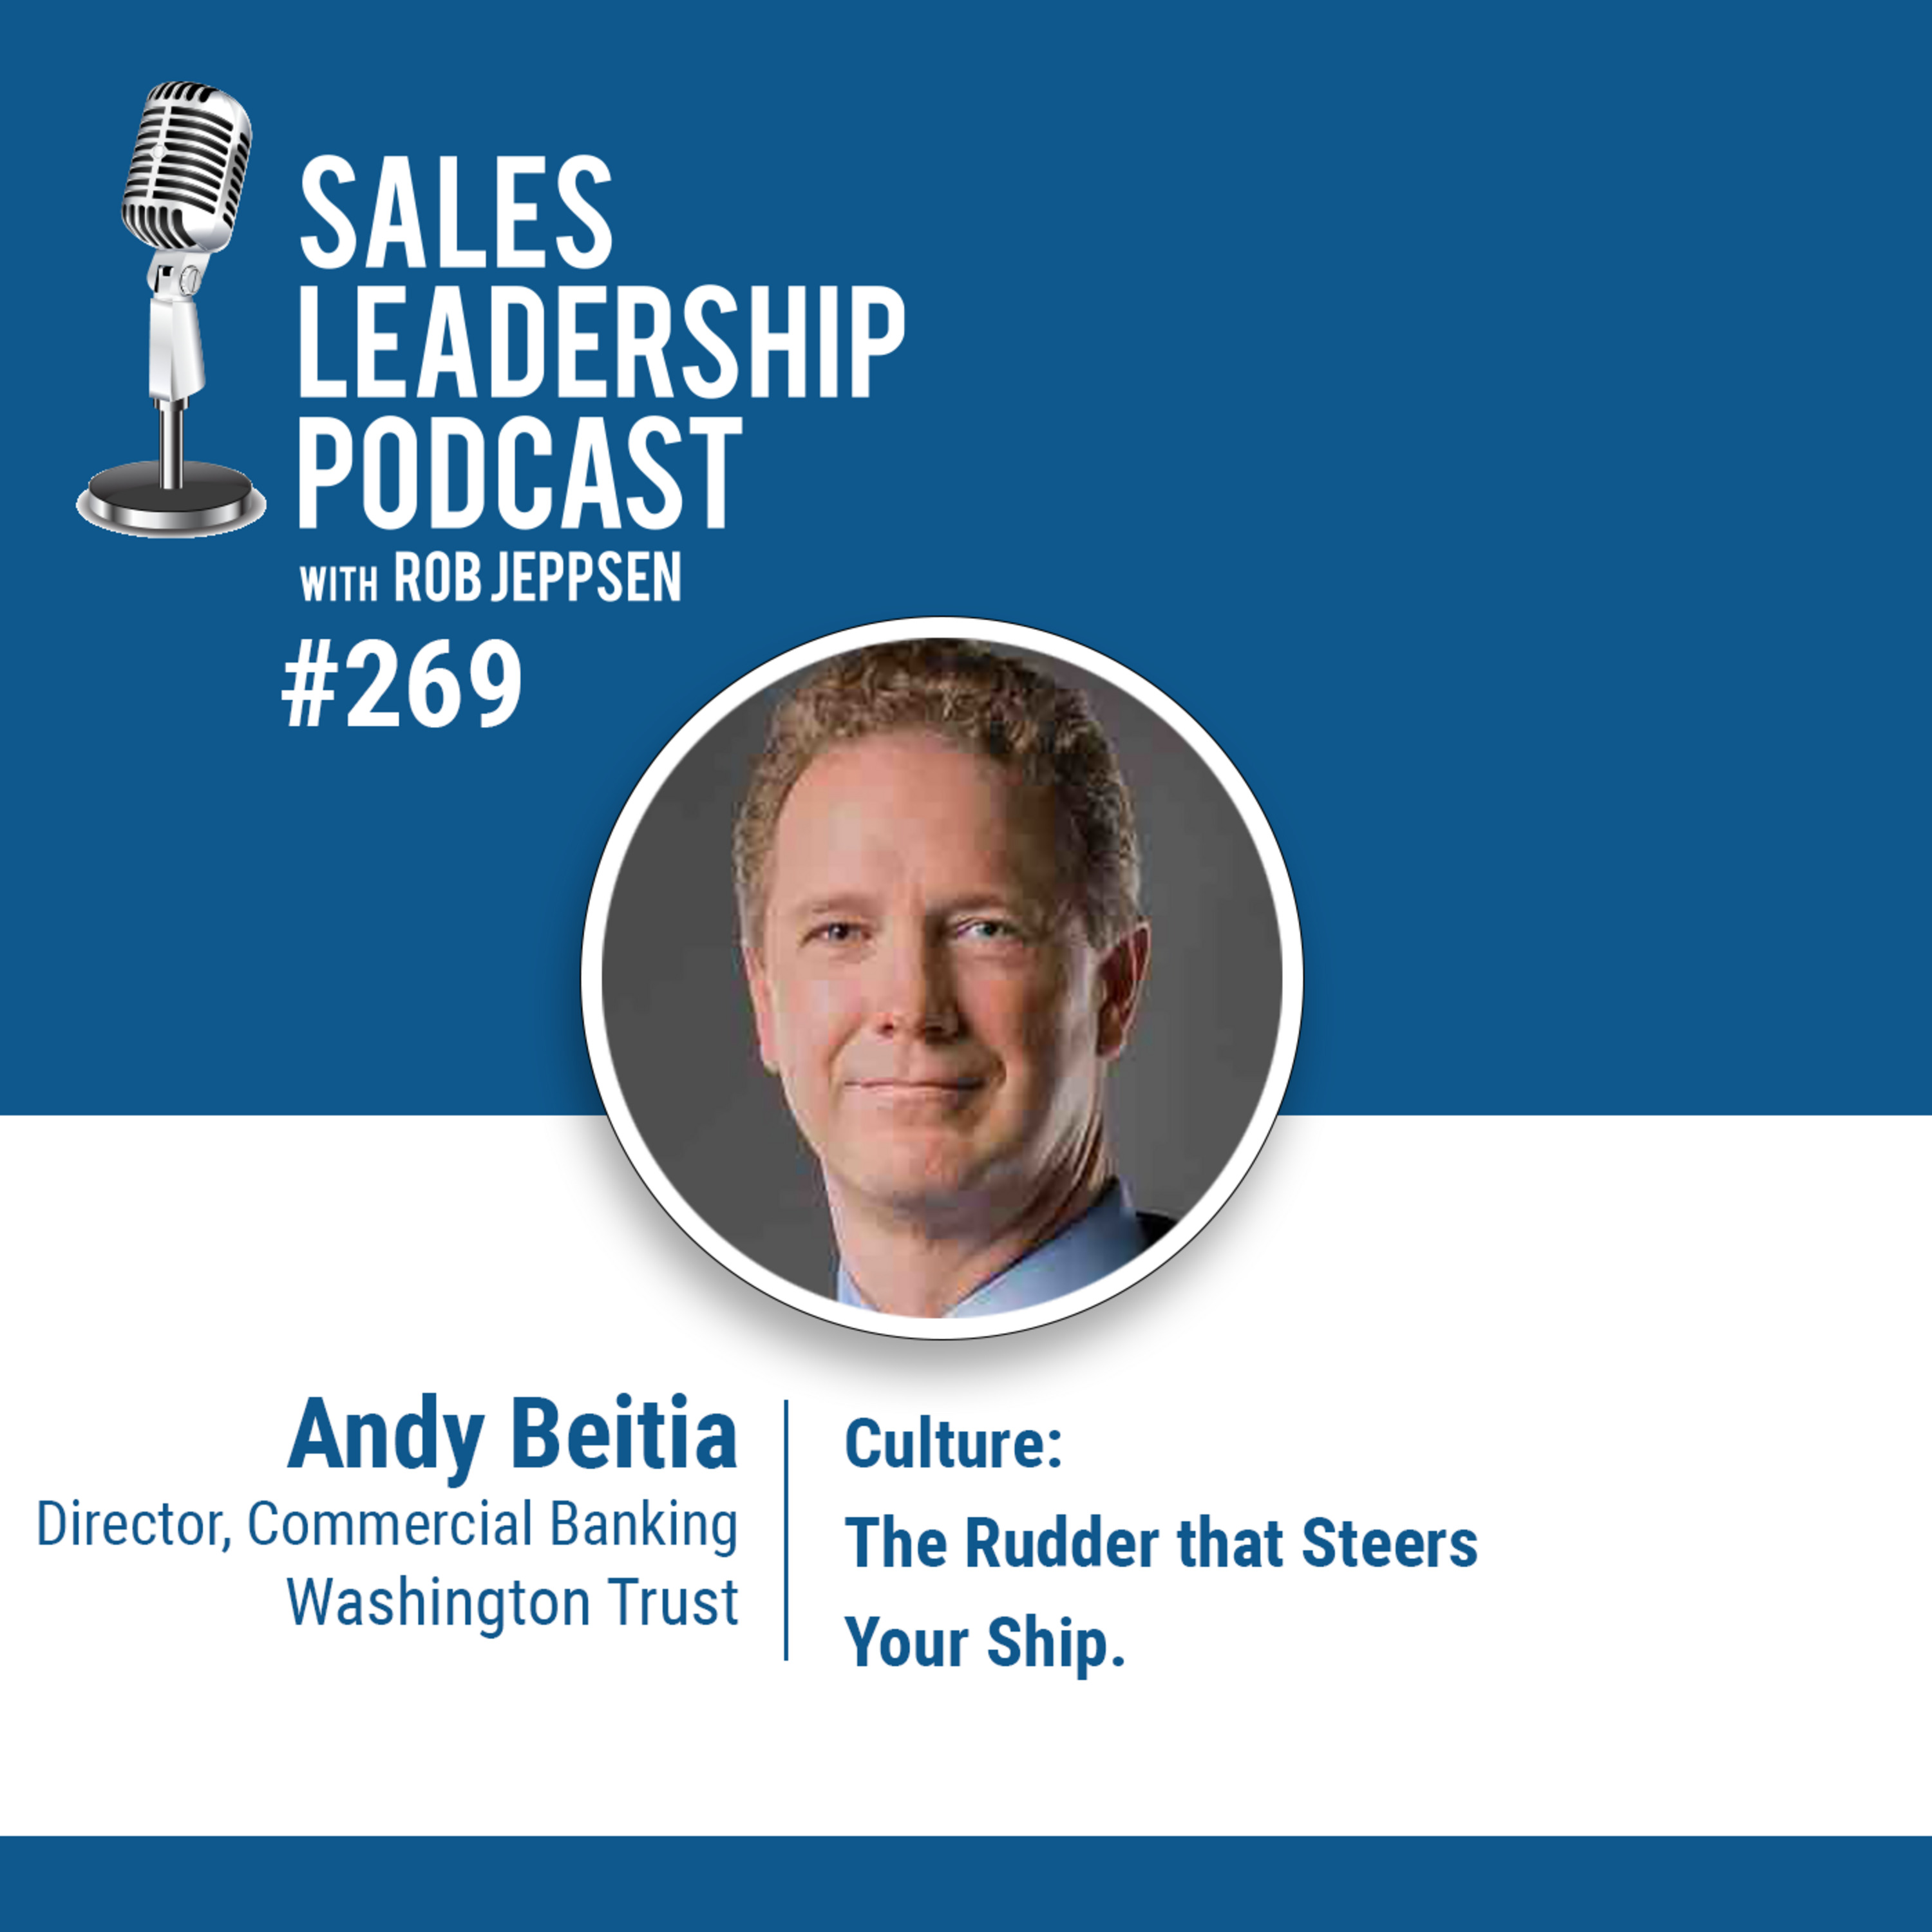 Episode 269: Andy Beitia, Director of Commercial Banking at Washington Trust Bank - Culture: The Rudder that Steers Your Ship.